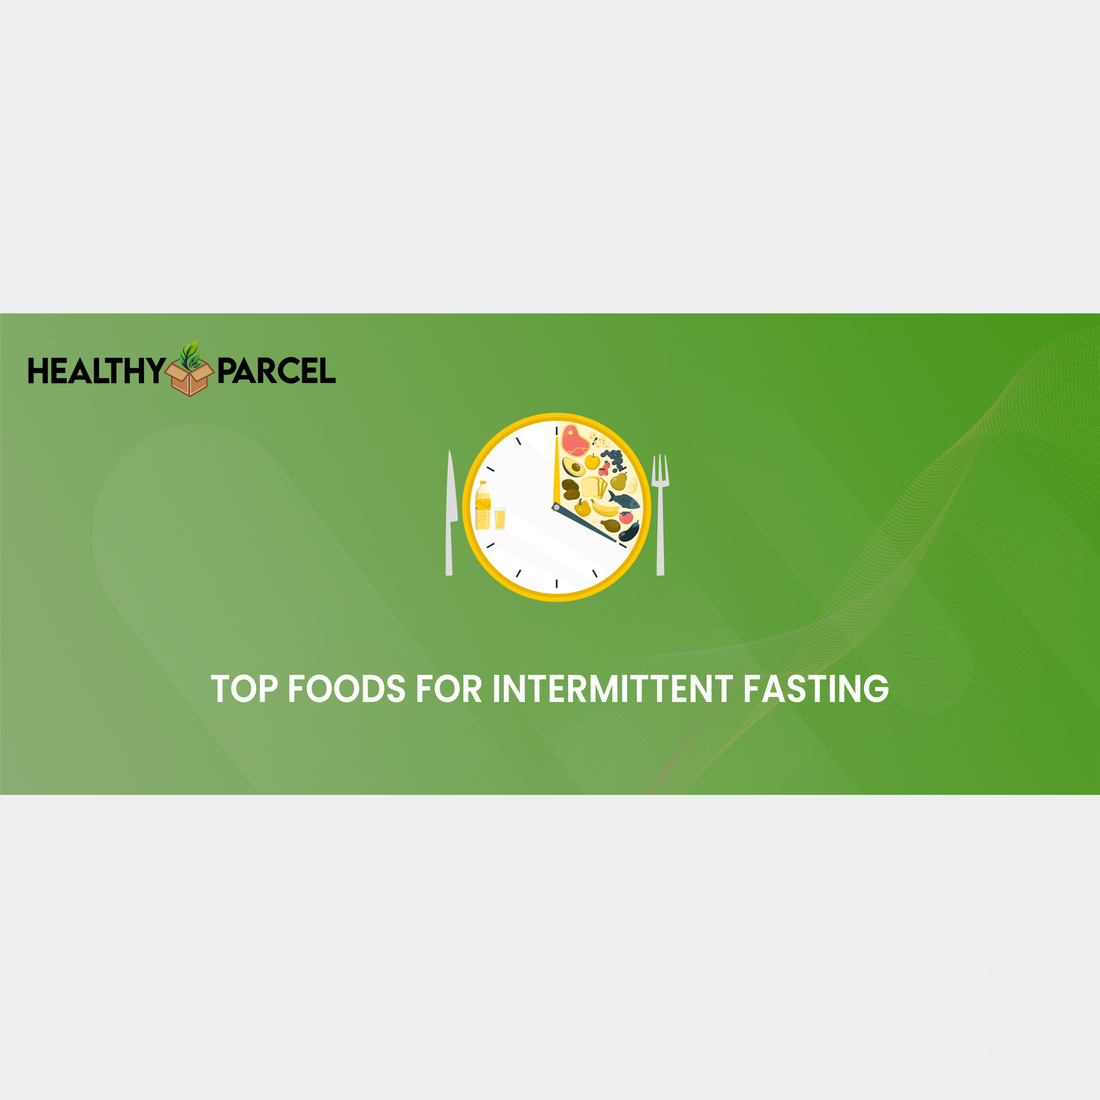 Top Foods for Intermittent Fasting